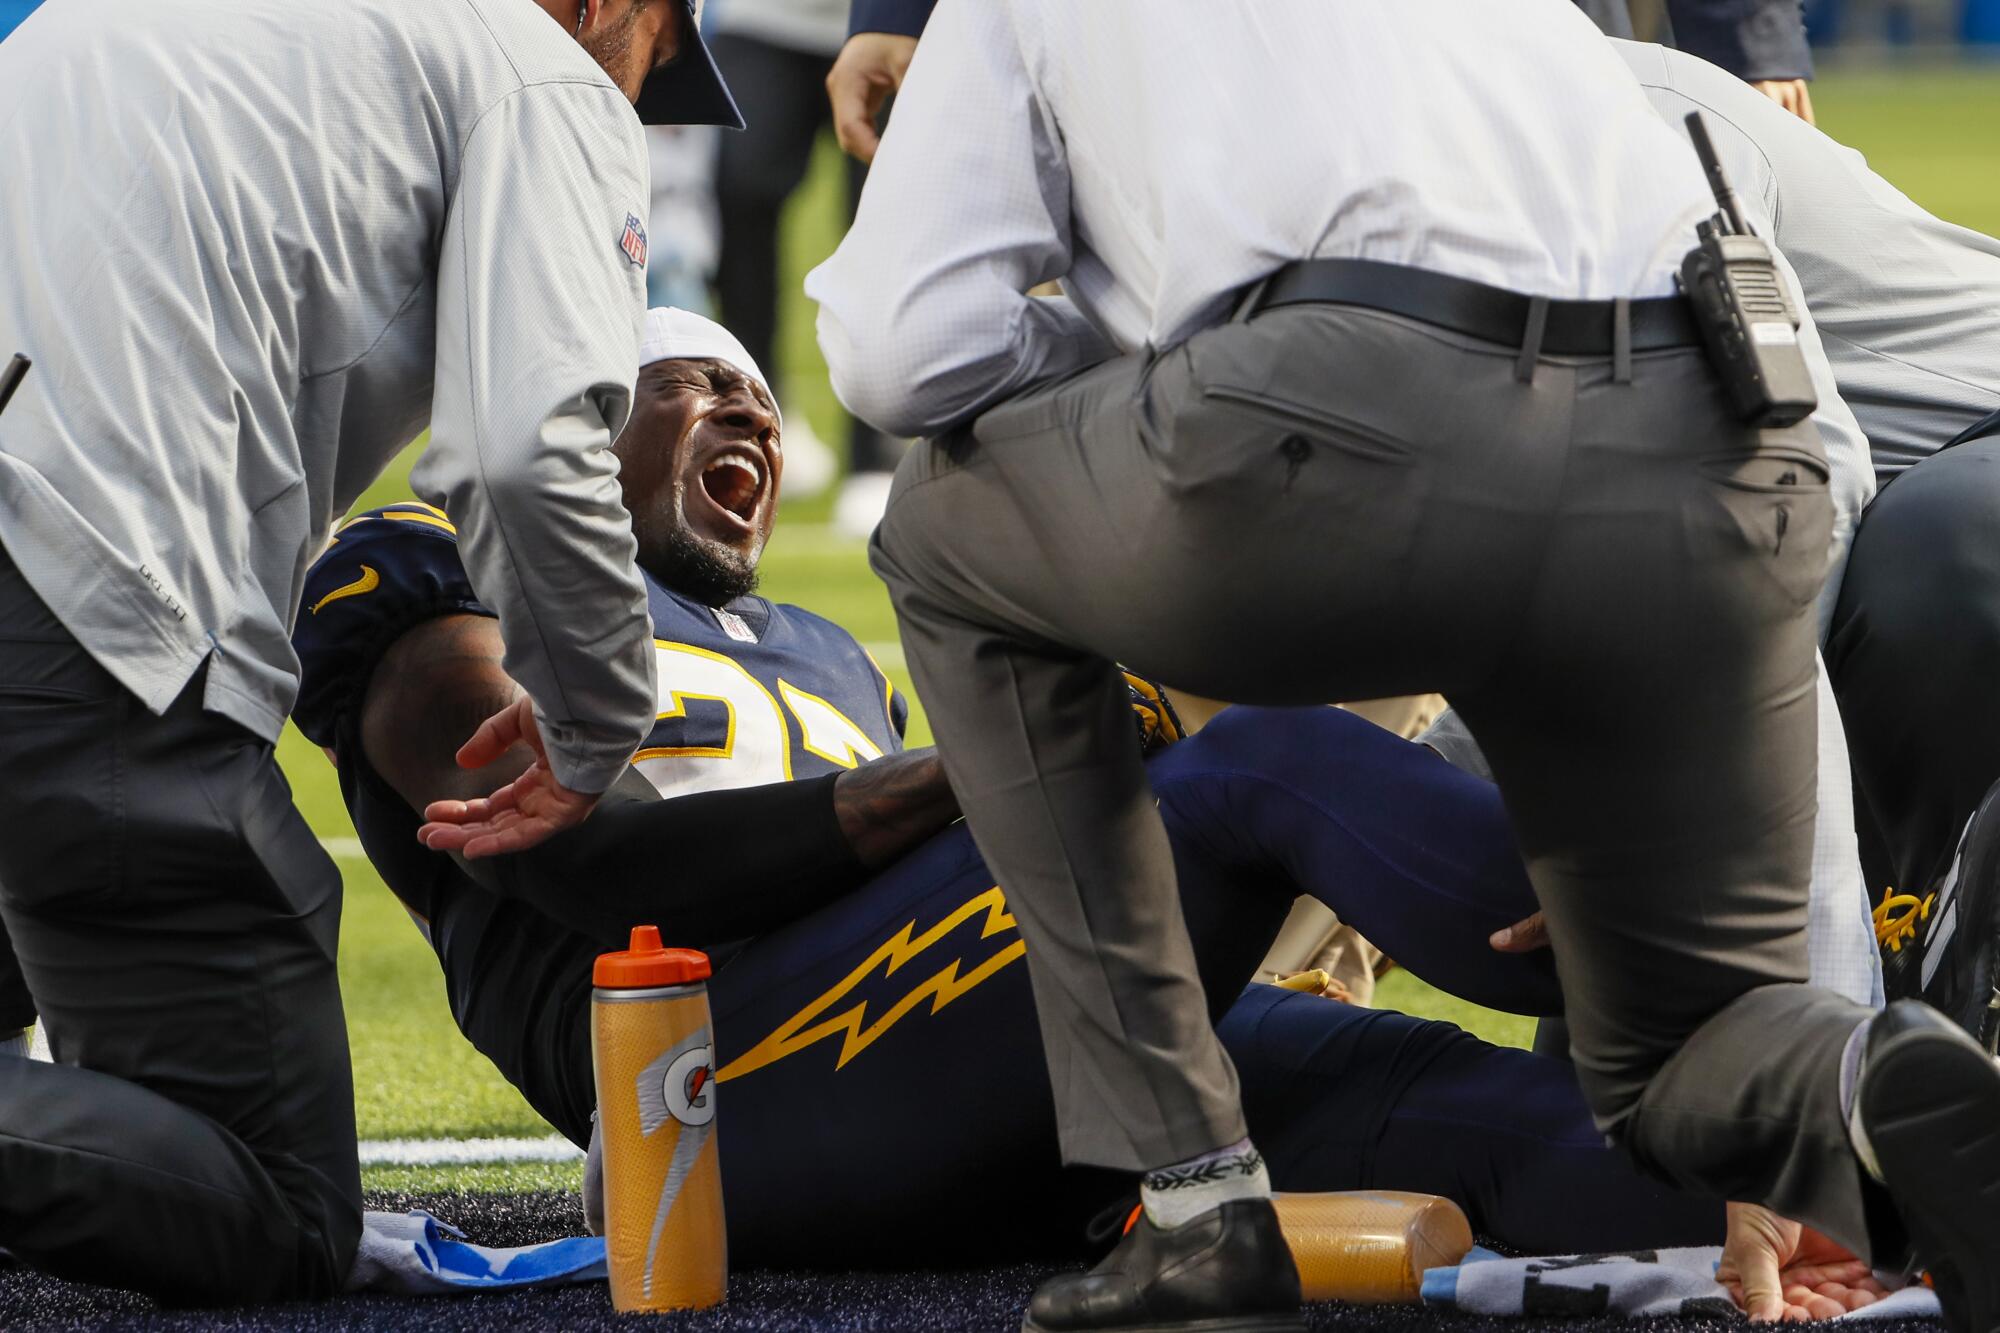 Chargers cornerback J.C. Jackson screams out in pain after sustaining an injury in the second quarter.